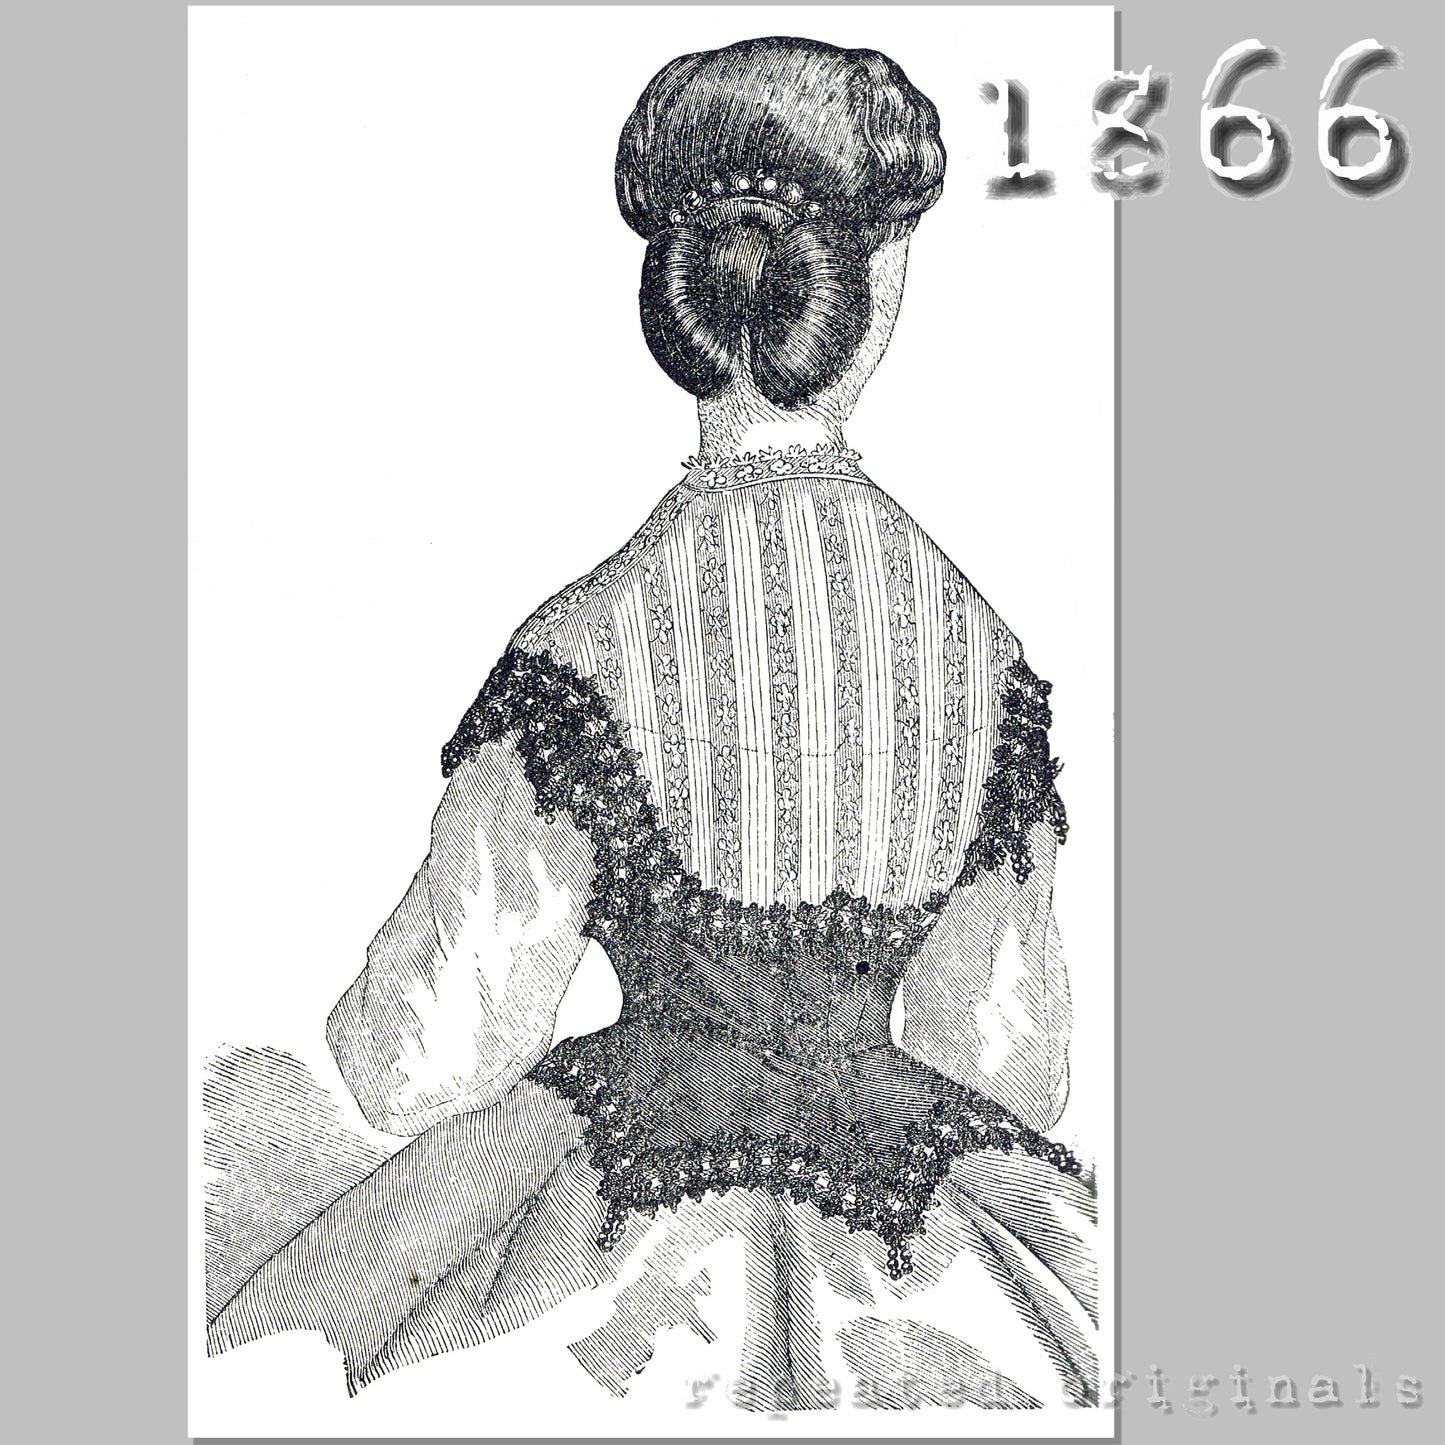 1866 Corselet with Bretelles Sewing Pattern - INSTANT DOWNLOAD PDF